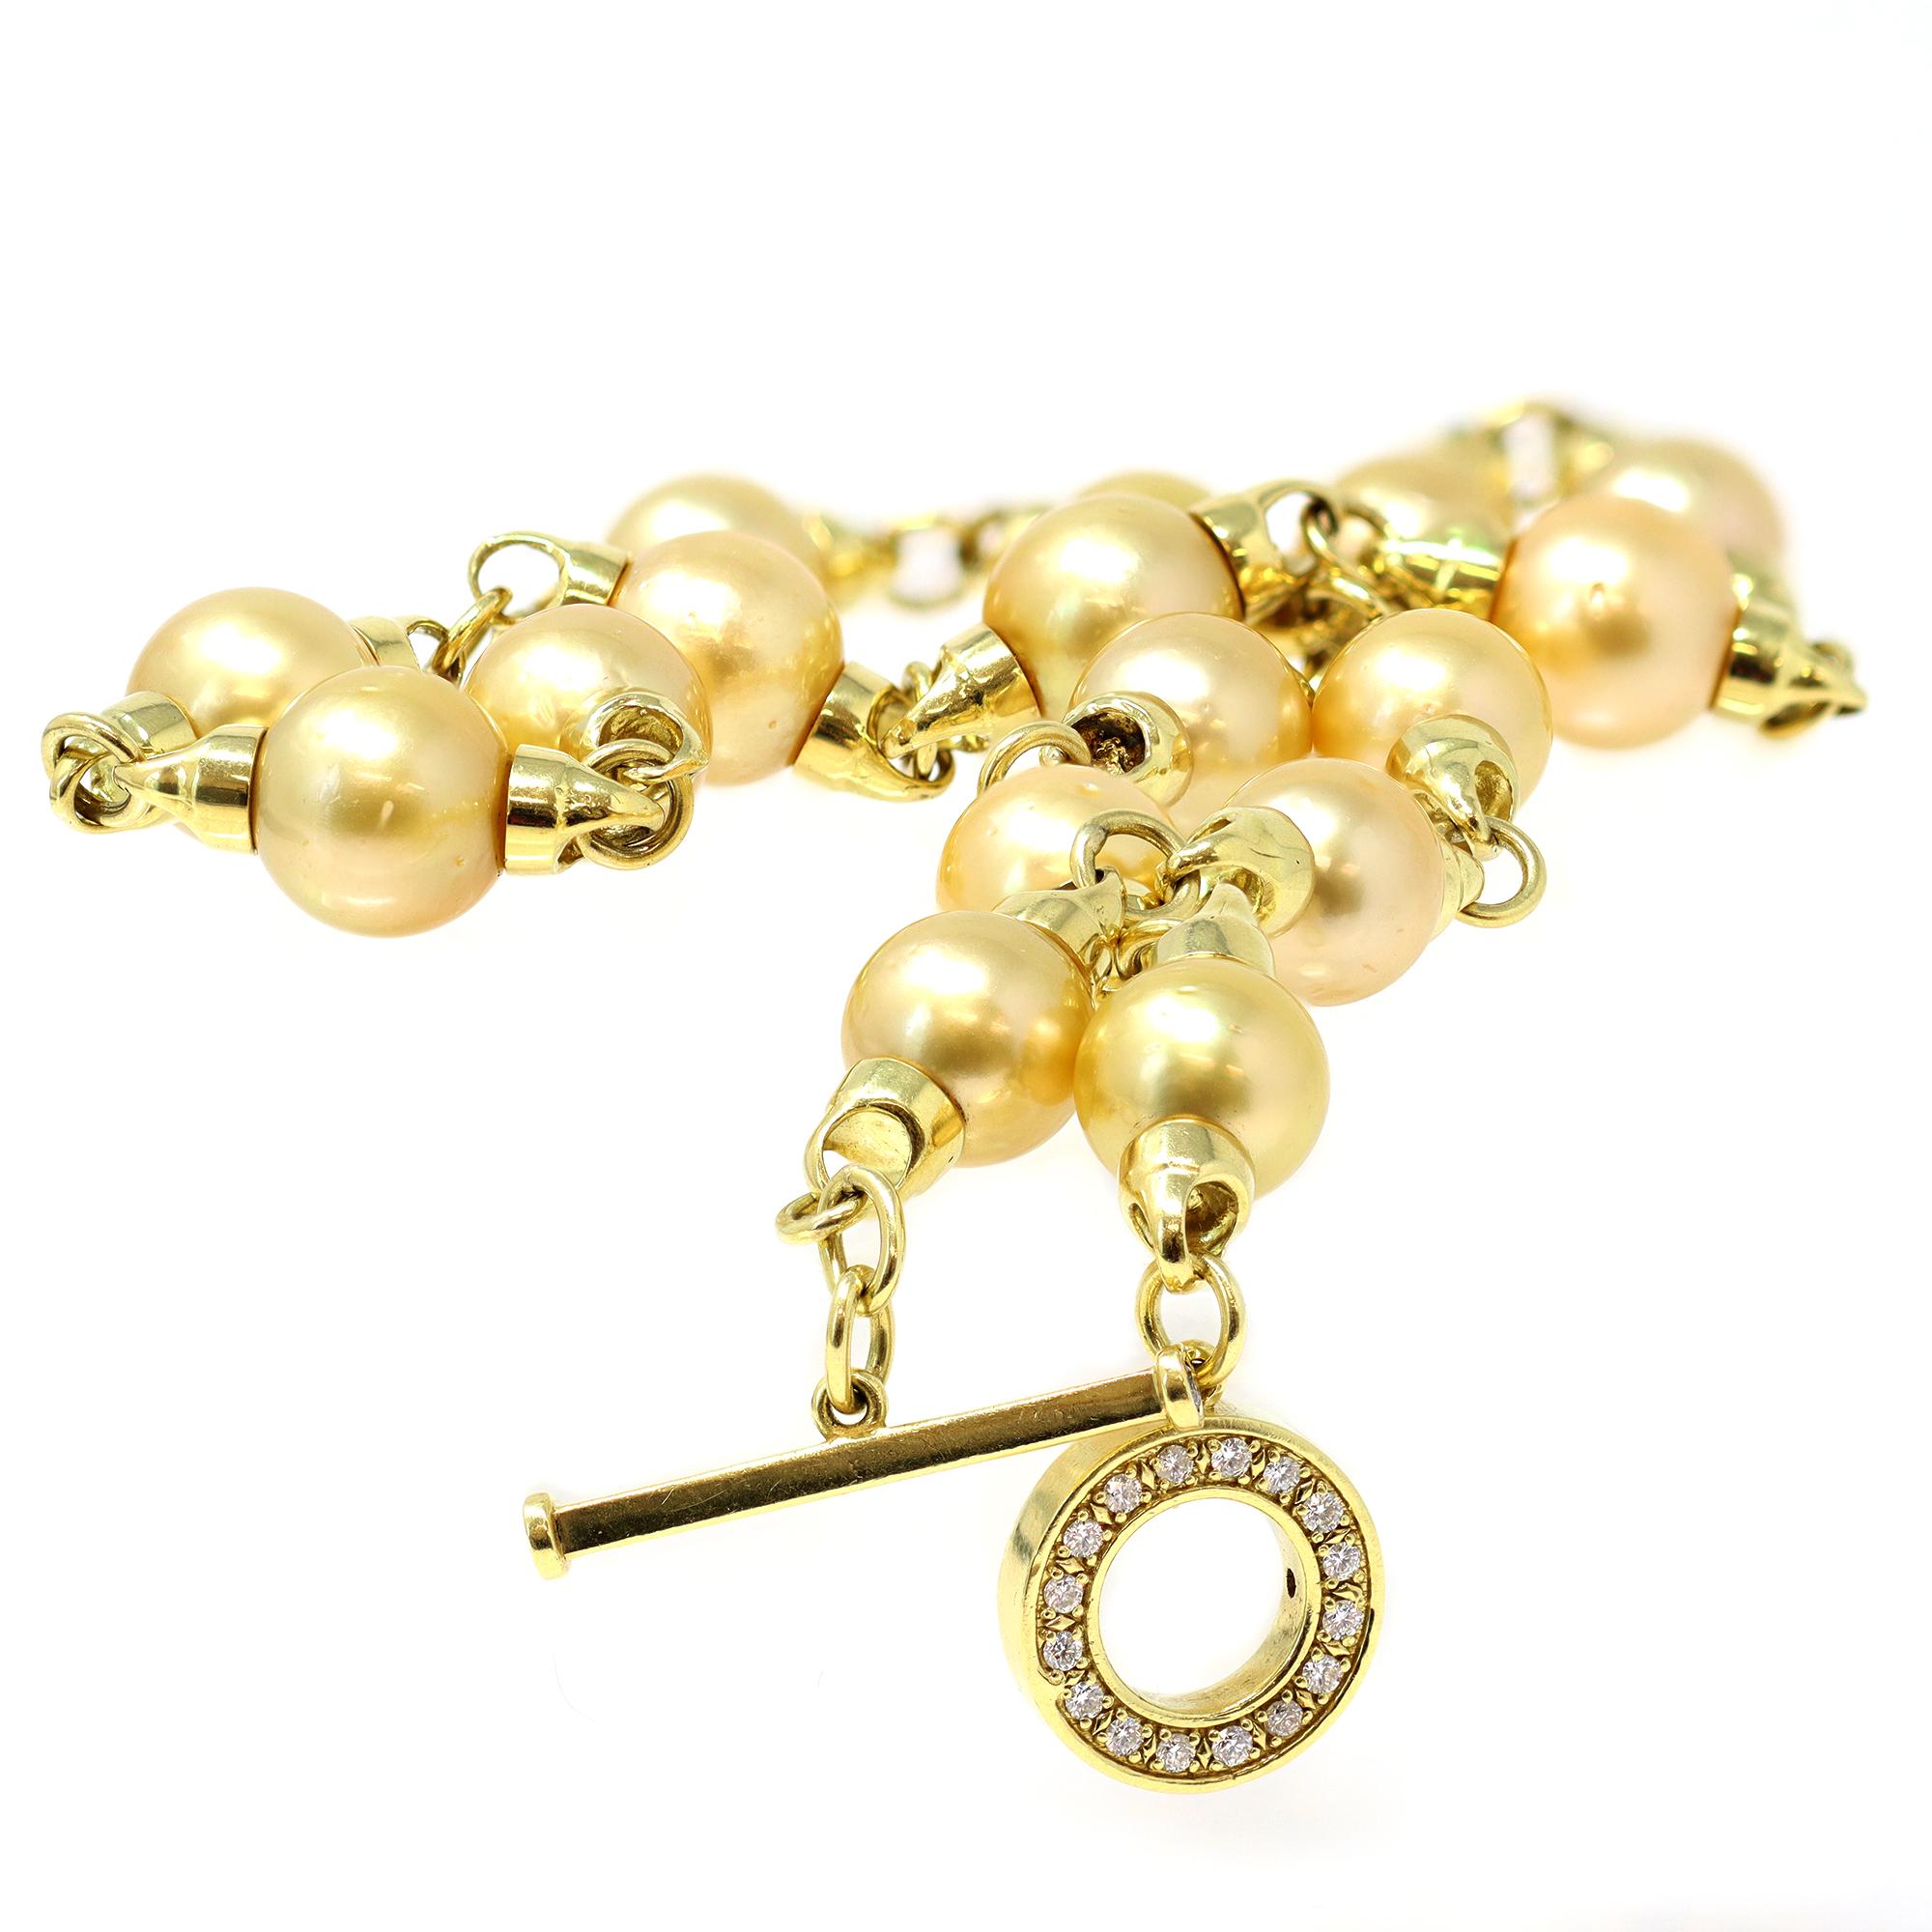 A contemporary natural gold South Sea pearl station necklace in 18K yellow gold with a diamond toggle clasp. Designed by Rosaria Varra, this station necklace features 11-12mm natural gold South Sea pearls with very good luster and few surface